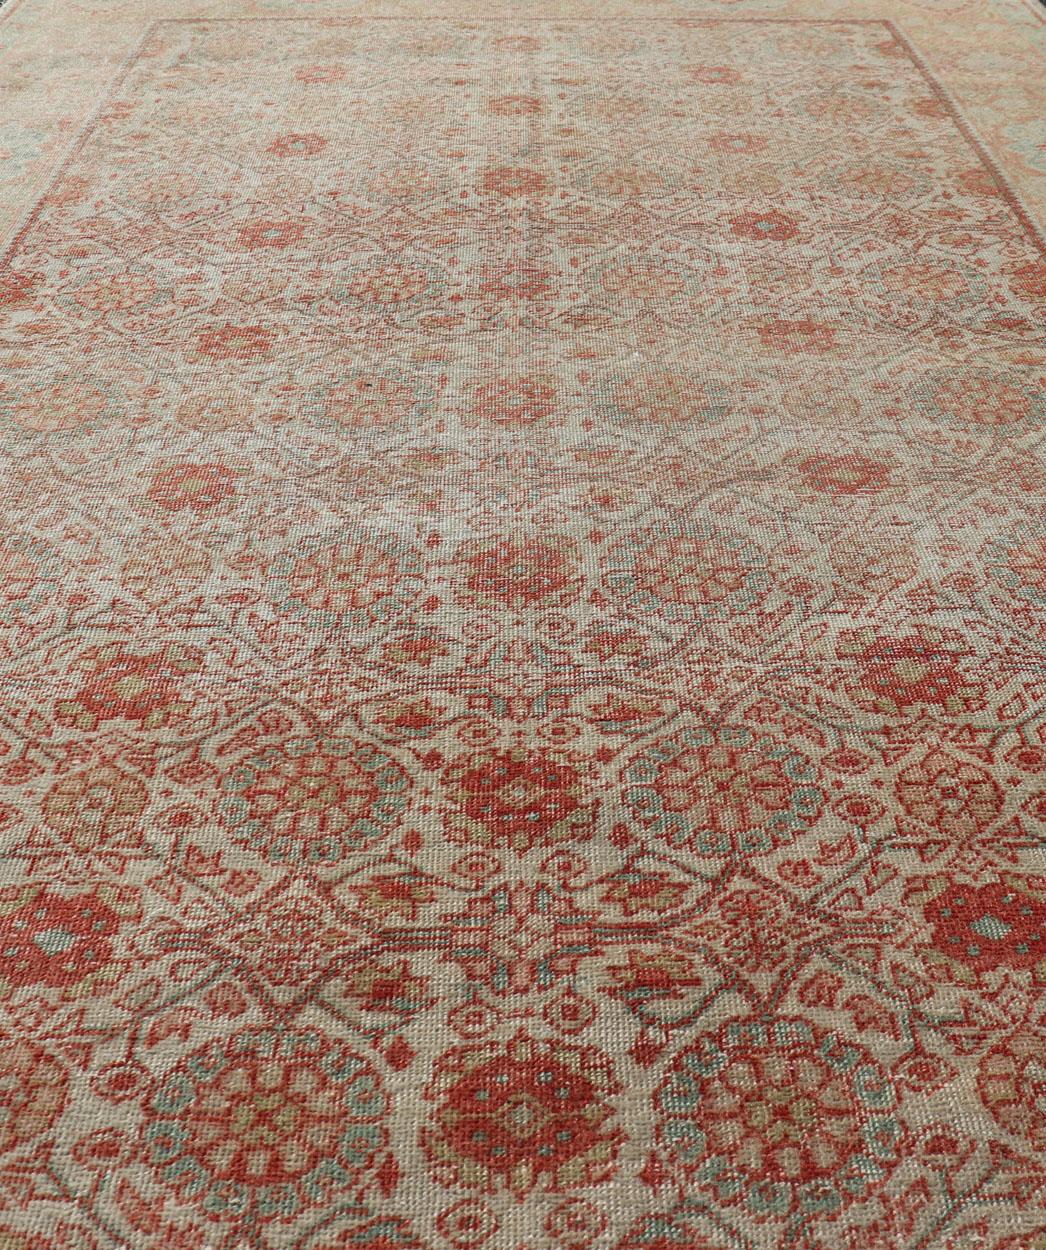 Persian Tabriz Rug with Boteh Design in Cream, Coral, Light Green/ Blue For Sale 3